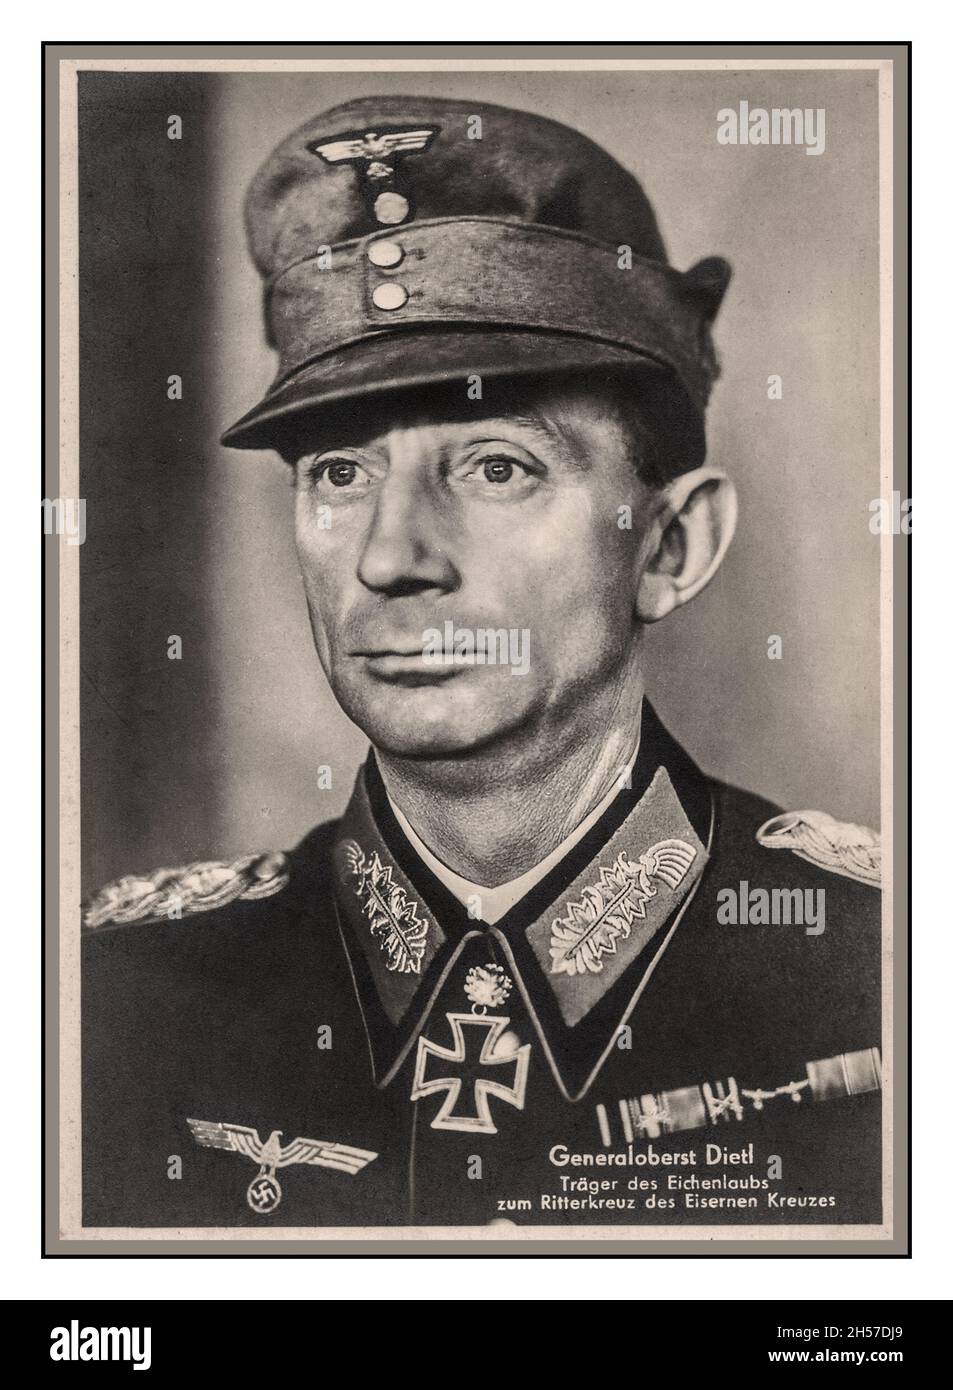 Generaloberst Dietl Official Nazi Portrait, commanded the German 3rd Mountain Division that participated in the German invasion of Norway on 9 and 10 April 1940. Most of this division was landed at Narvik by a German naval force of ten destroyers, commanded by Commodore Friedrich Bonte, subsequently all ten destroyers that had ferried Dietl's troops to Narvik were sunk in the First and Second Battles of Narvik. Dietl's mountaineers withdrew into the hills and later retook the town when Britain abandoned her efforts to evict the Germans from Norway due to German success on the Western Front Stock Photo